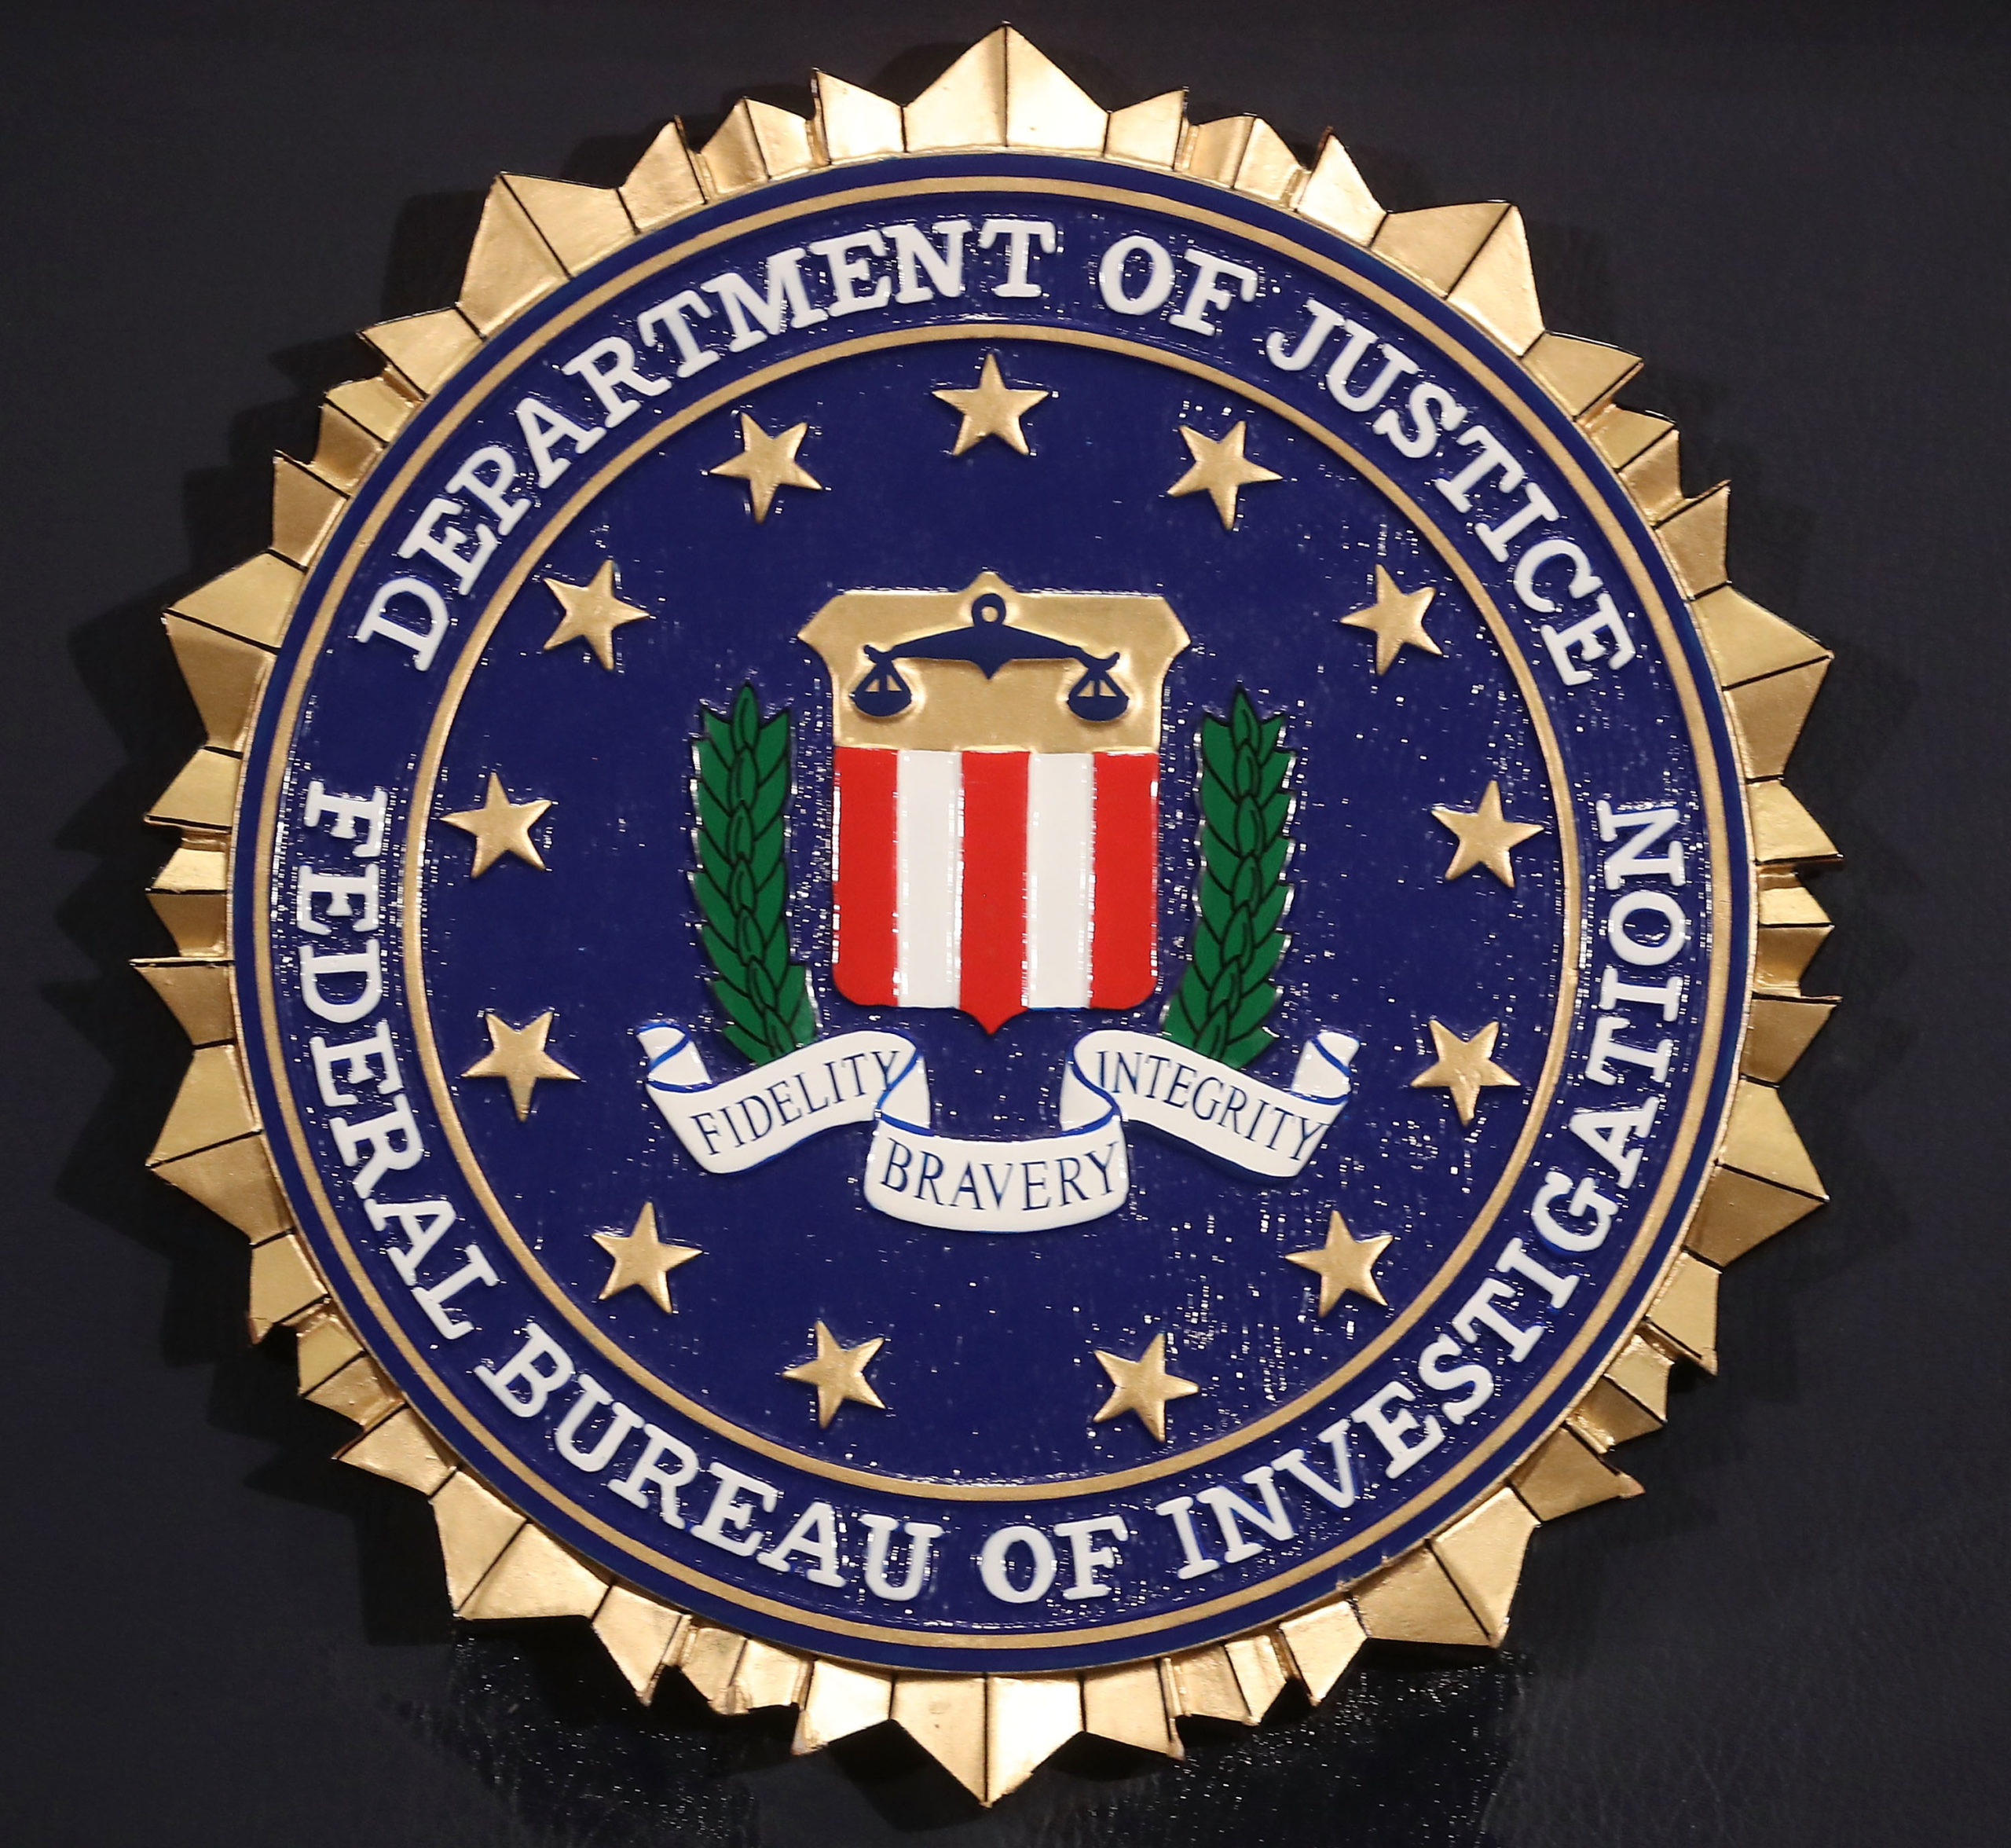 WASHINGTON, DC - JUNE 14: The FBI seal is attached to a podium prior to Director is Christopher A. Wray speakin at a news conference at FBI Headquarters, on June 14, 2018 in Washington, DC. Earlier today the inspector general released a 500 page report on the Clinton email investigation. (Photo by Mark Wilson/Getty Images)